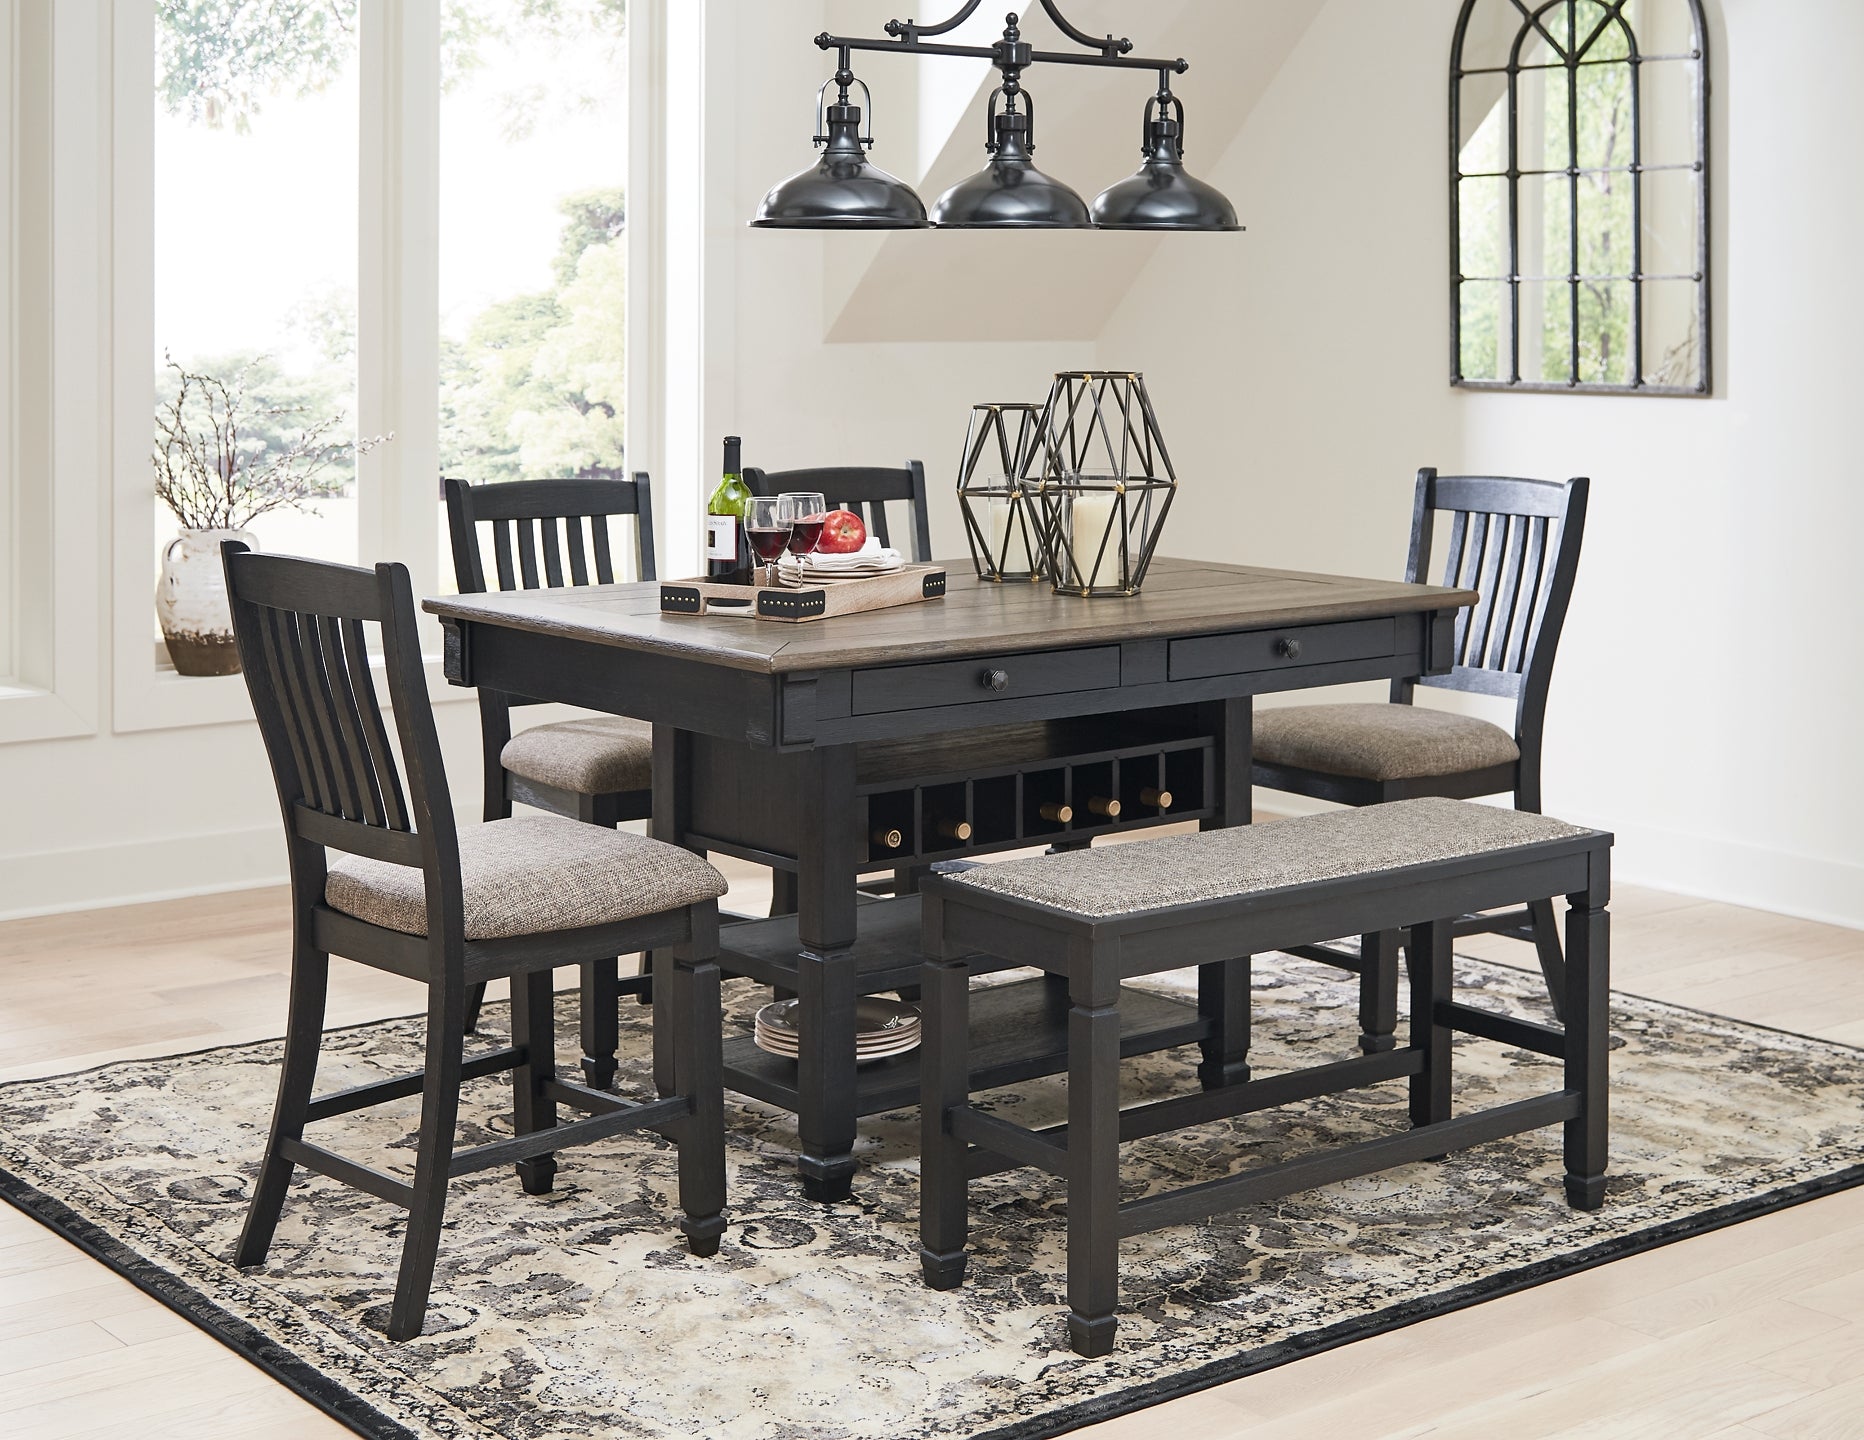 Tyler Creek Counter Height Dining Table and 4 Barstools and Bench Wilson Furniture (OH)  in Bridgeport, Ohio. Serving Moundsville, Richmond, Smithfield, Cadiz, & St. Clairesville